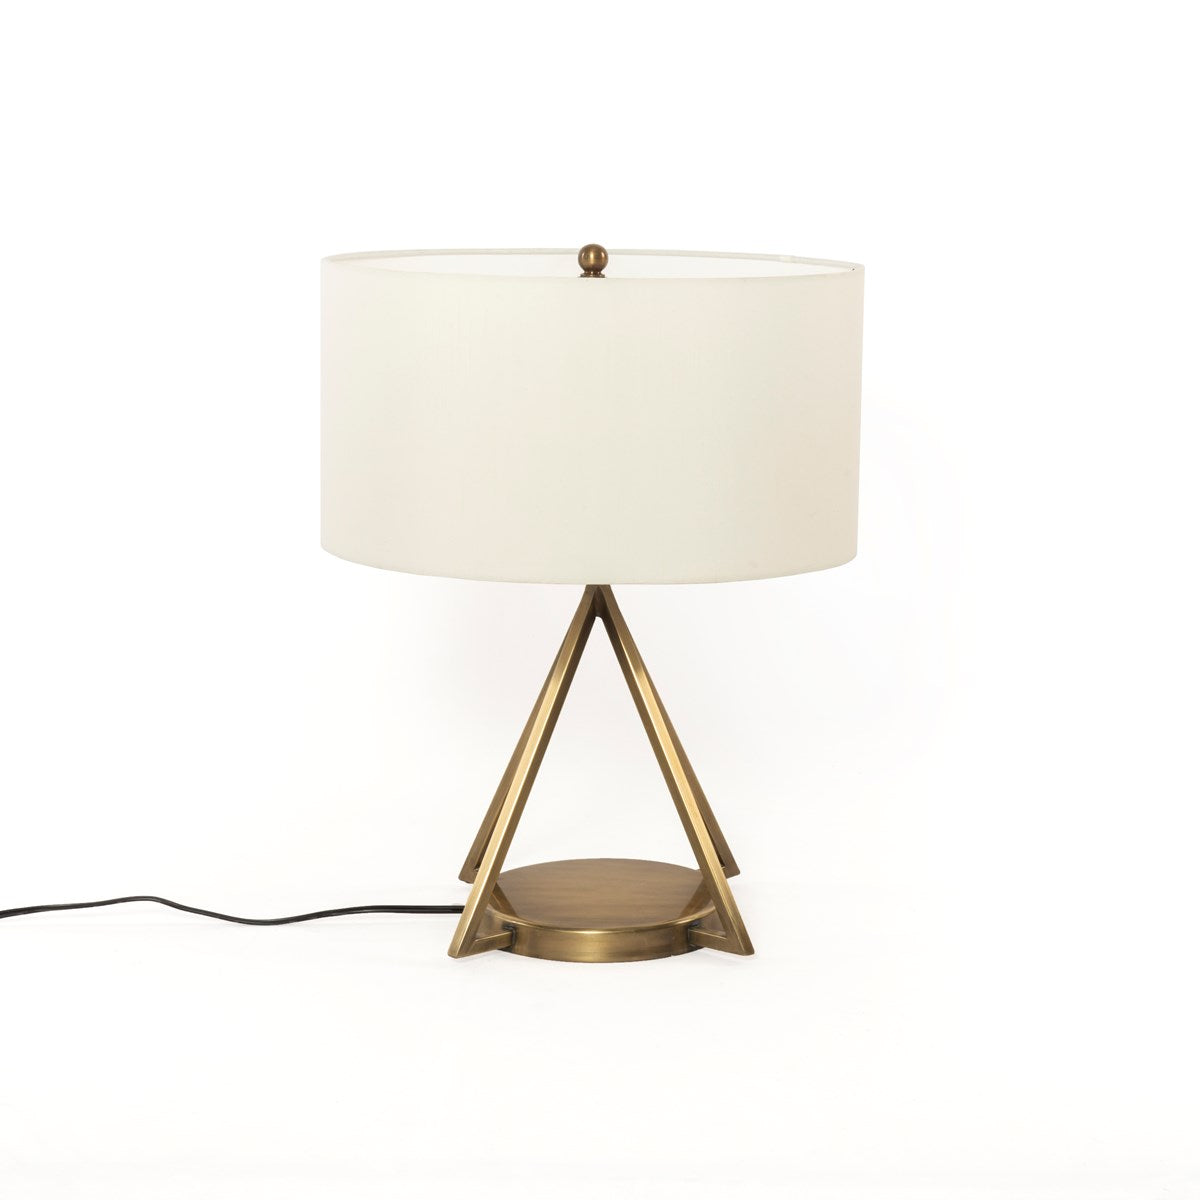 Load image into Gallery viewer, Walden Table Lamp Table lamp Four Hands     Four Hands, Burke Decor, Mid Century Modern Furniture, Old Bones Furniture Company, Old Bones Co, Modern Mid Century, Designer Furniture, https://www.oldbonesco.com/
